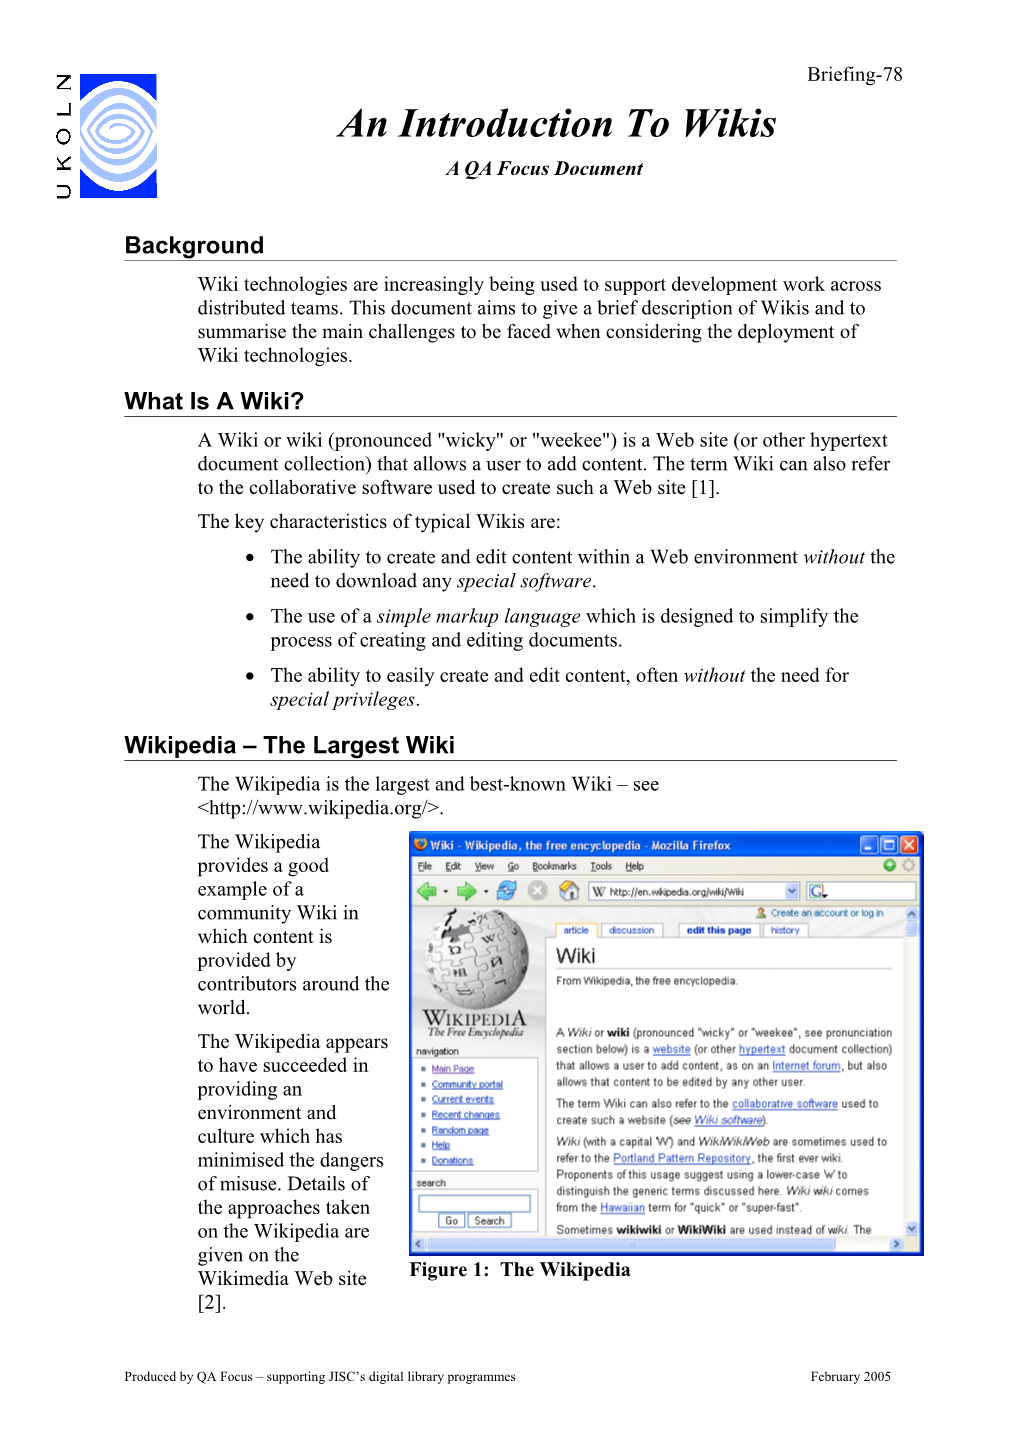 An Introduction to Wiki